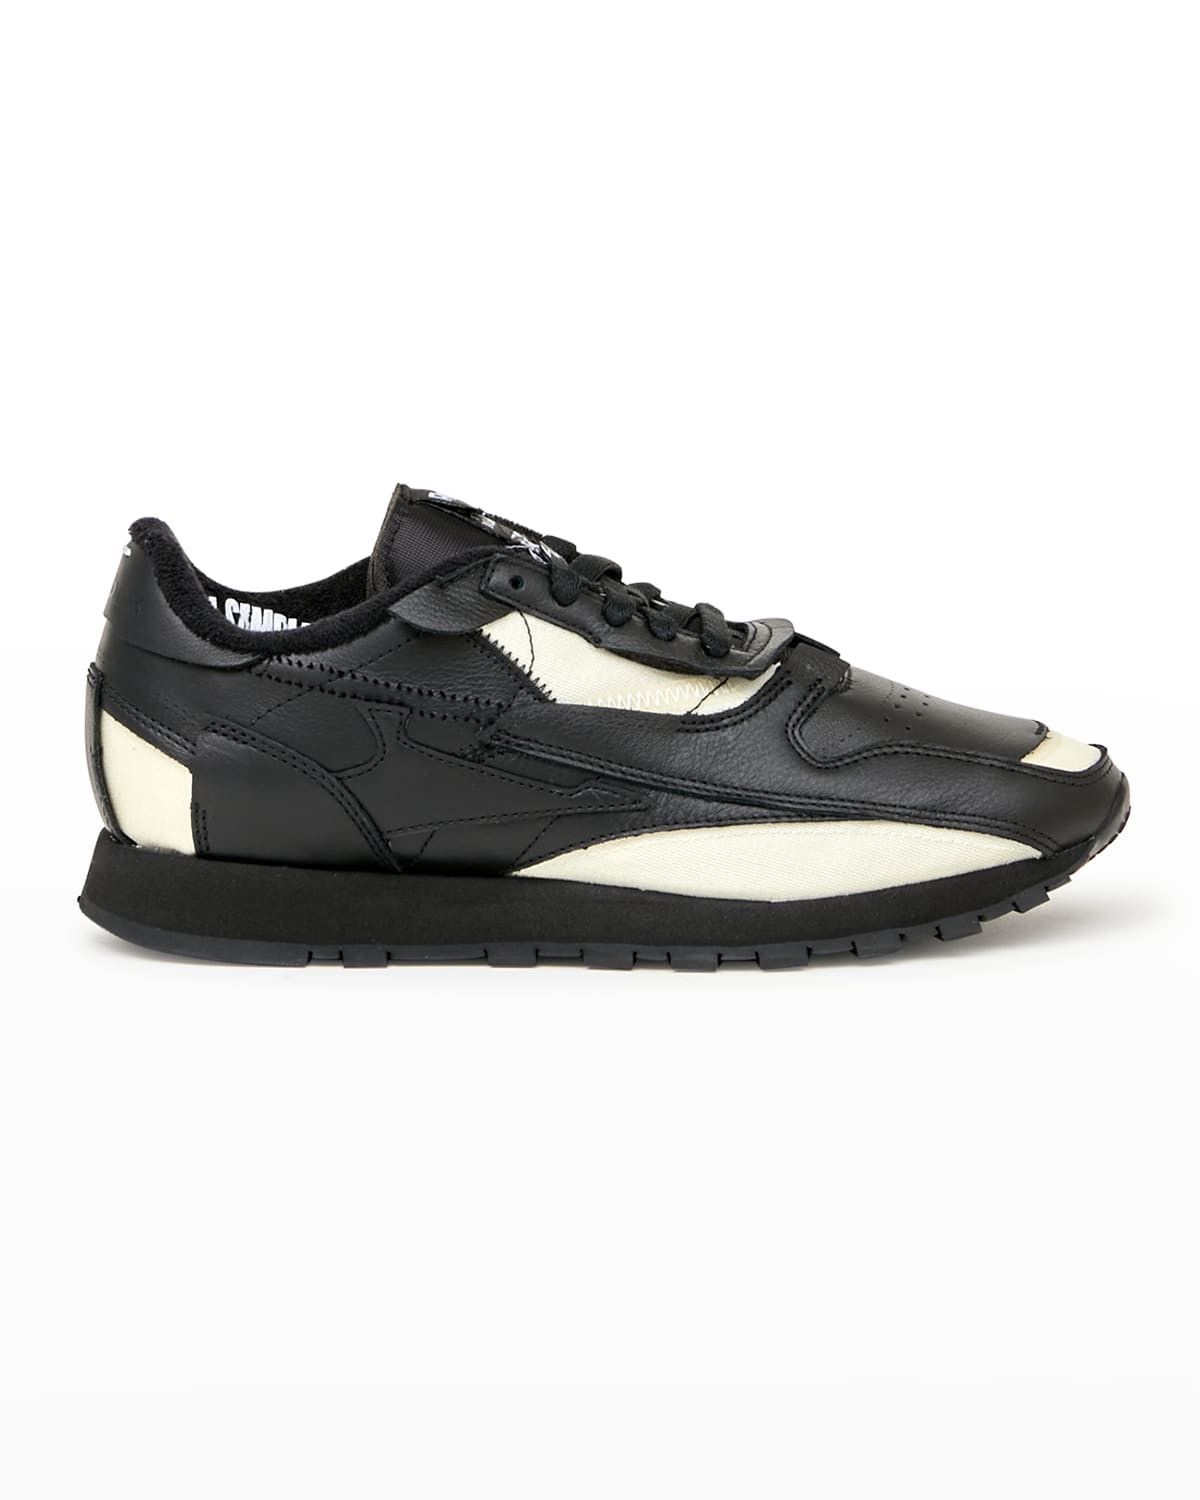 MAISON MARGIELA X REEBOK DECONSTRUCTED LEATHER TRACK SNEAKERS